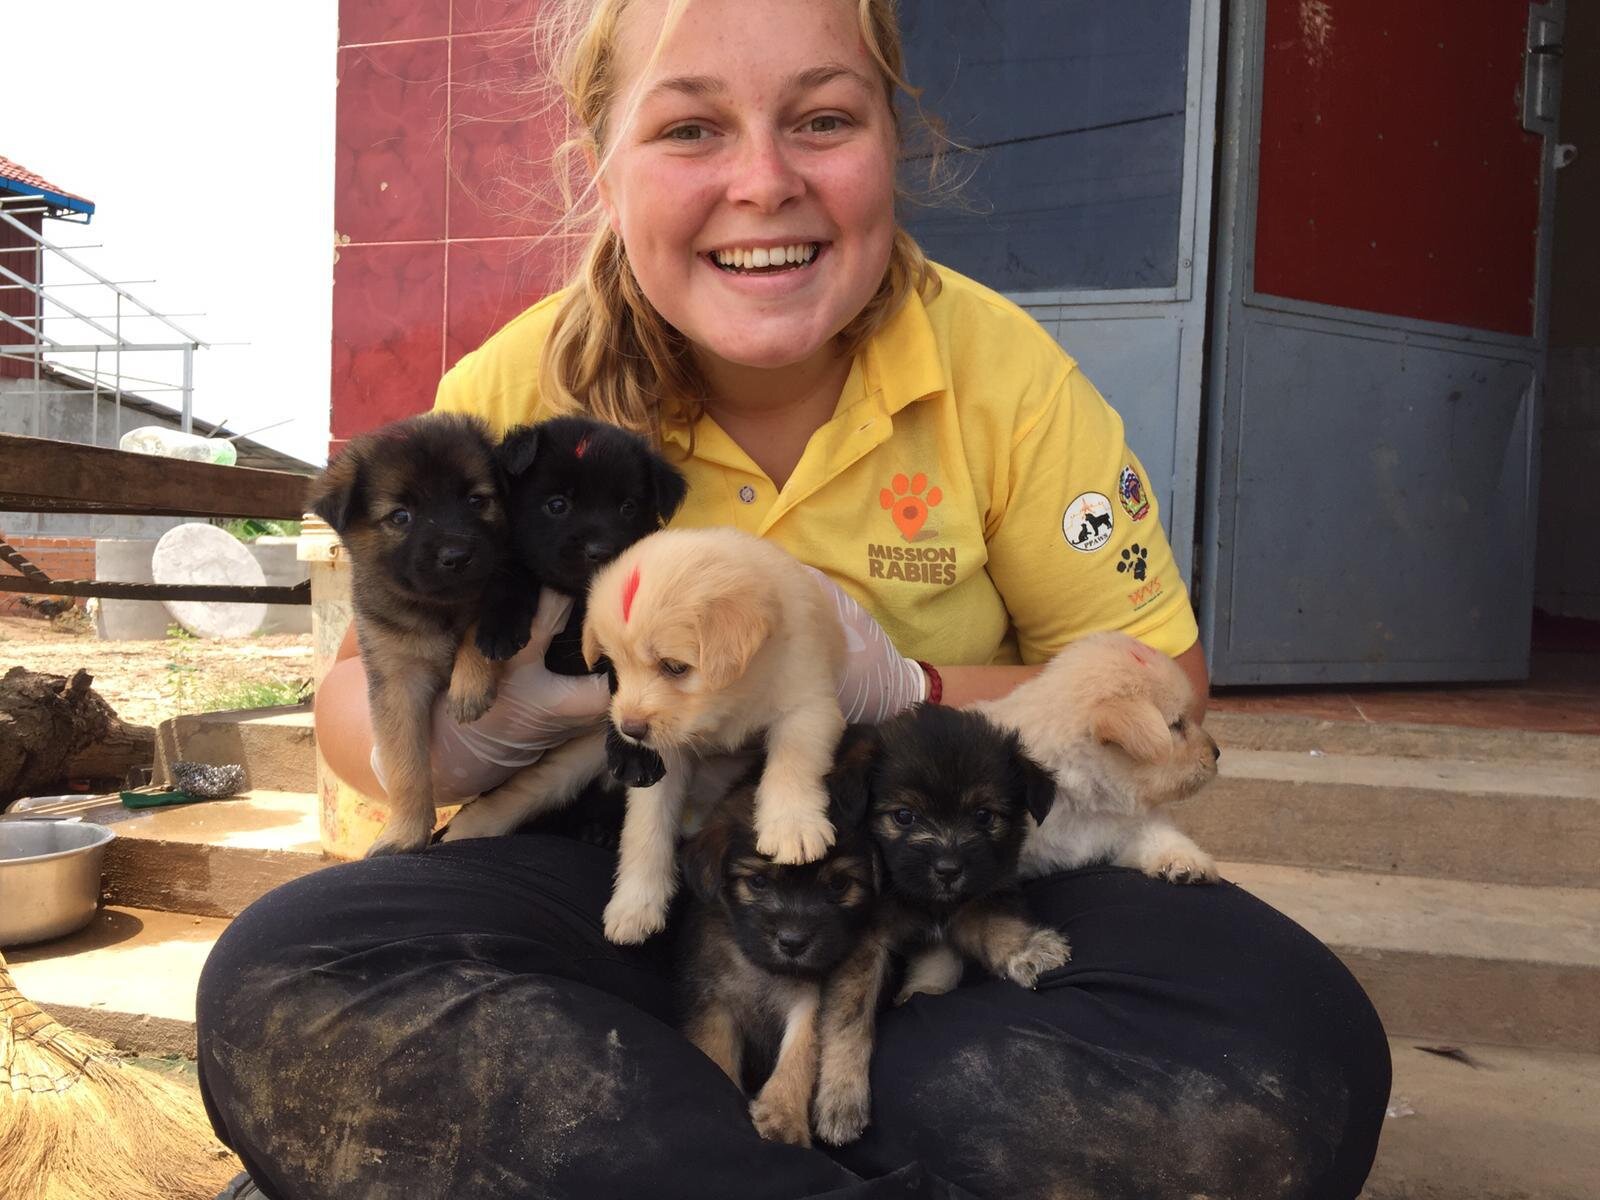 A Mission Rabies volunteer with vaccinated puppies in Cambodia 2019.jpeg